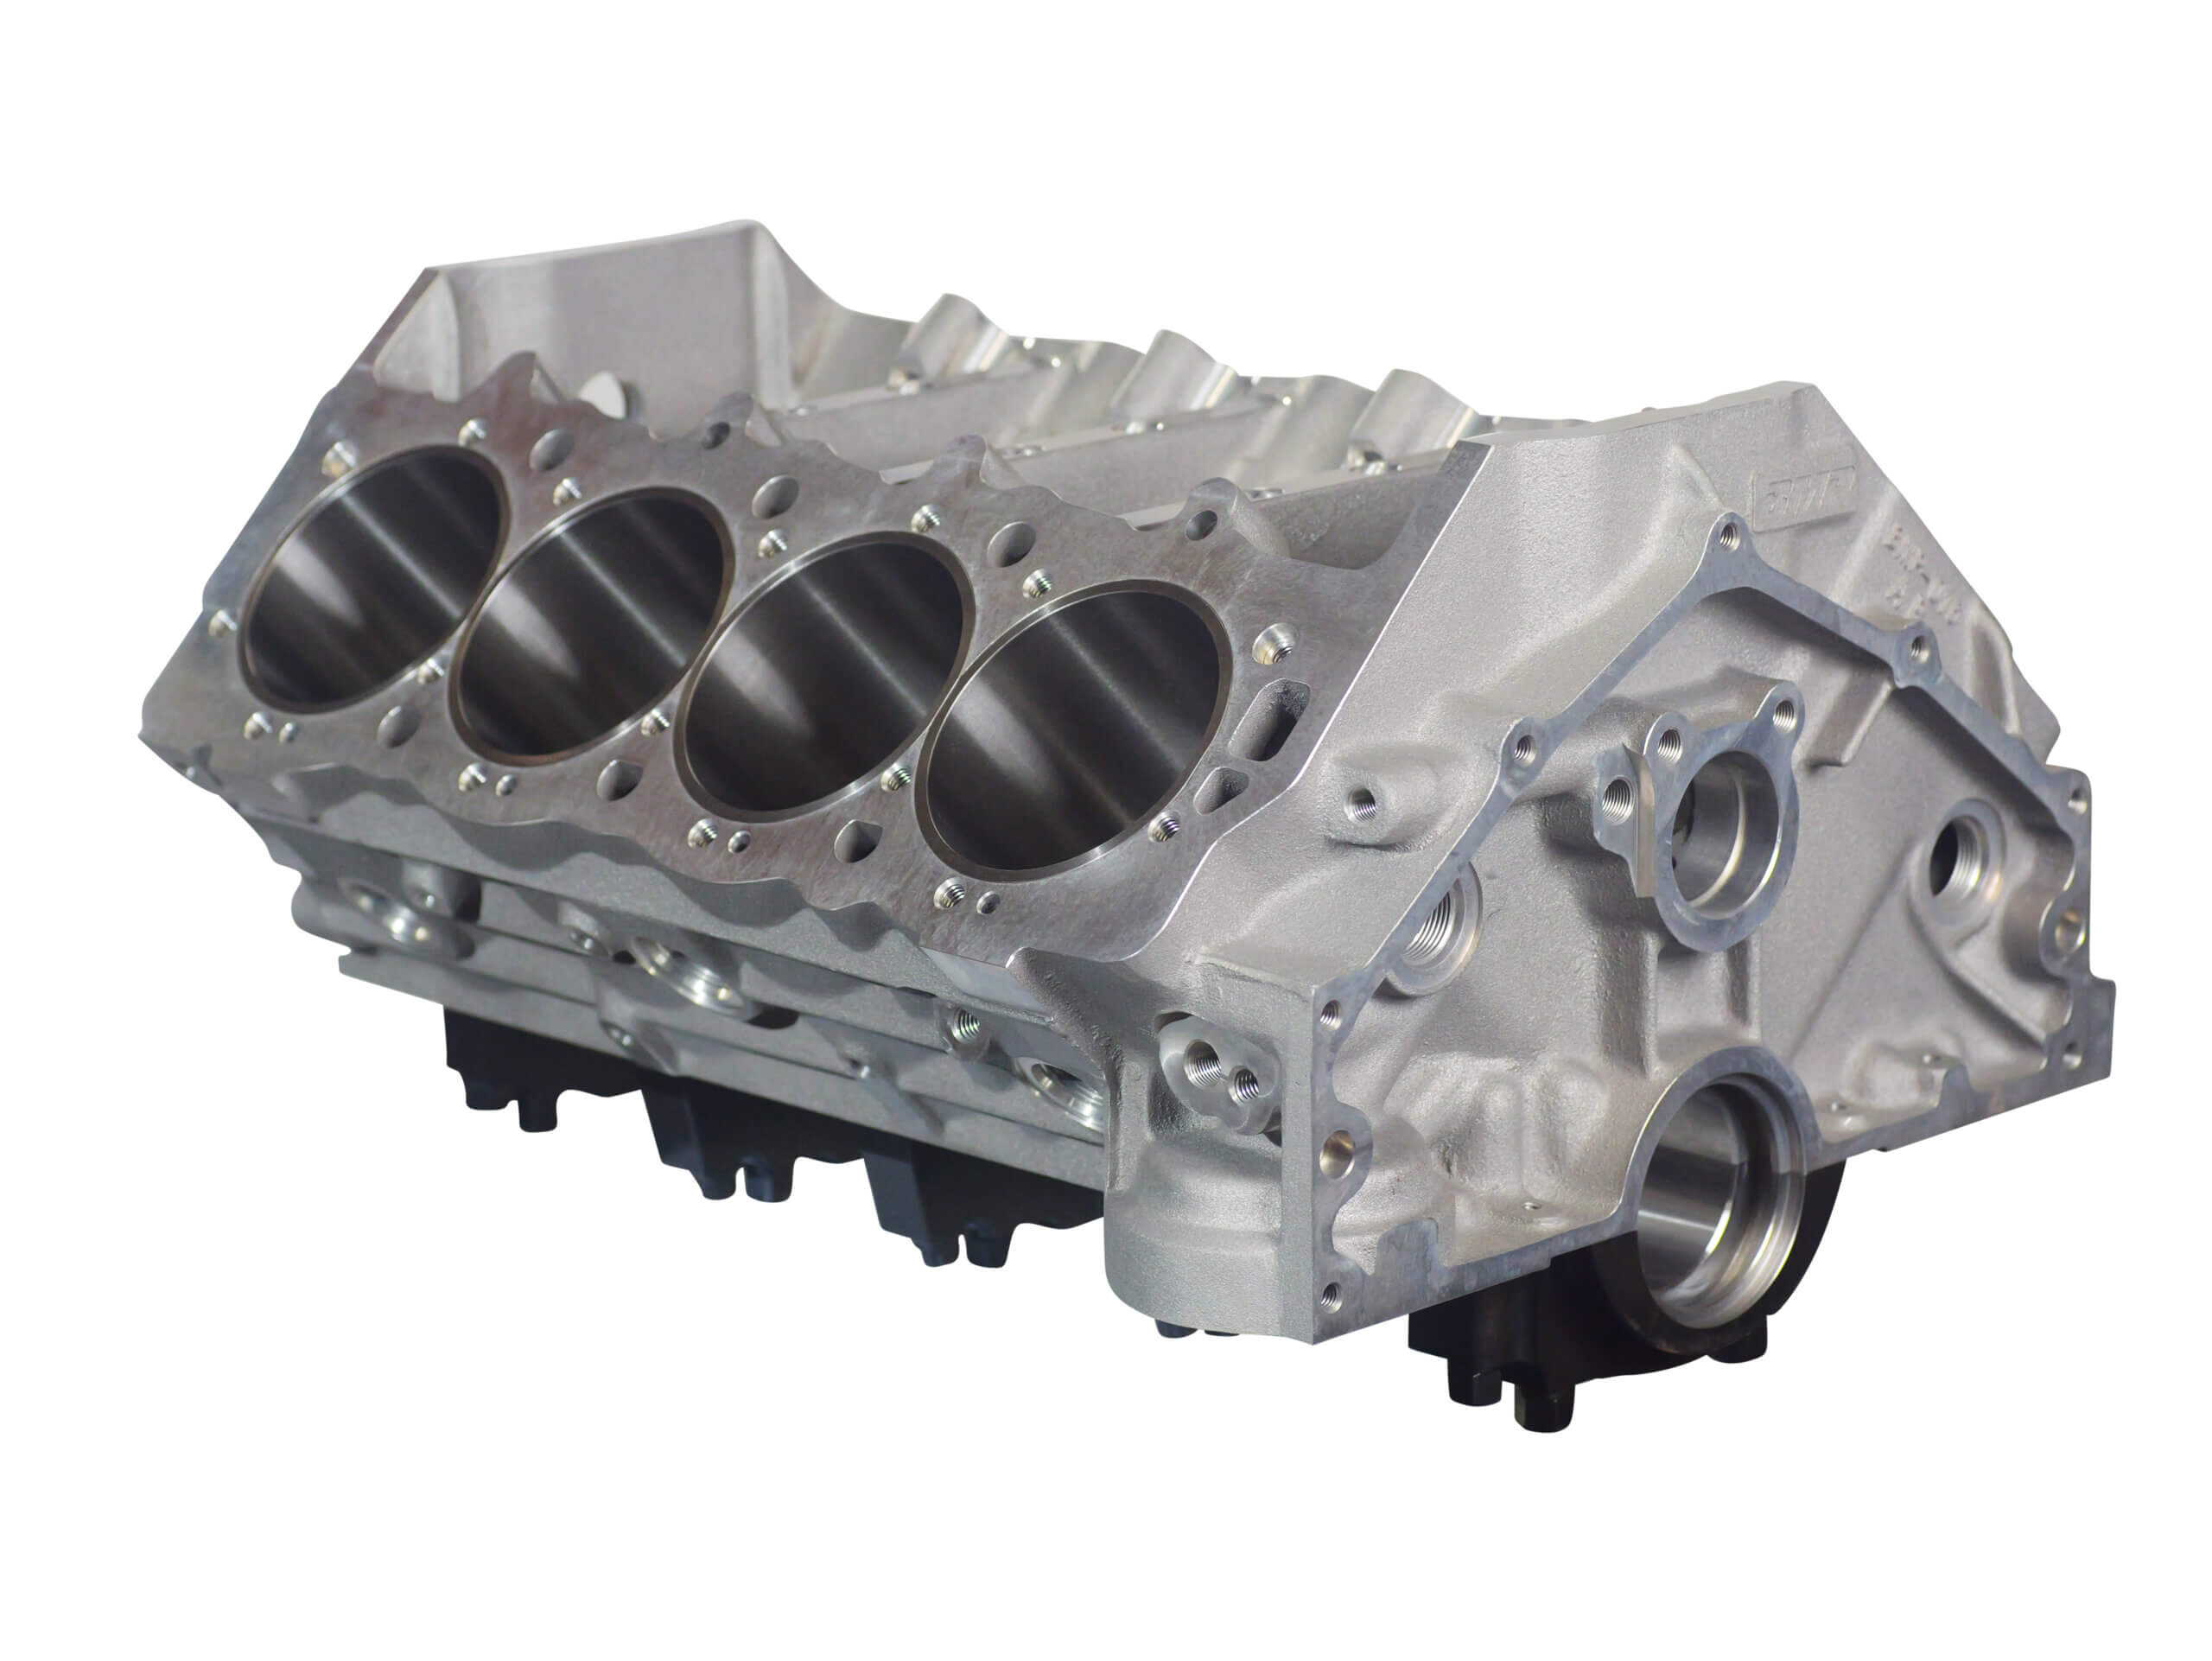 Bill Mitchell Products BBC 357T6 Aluminum Engine Block Chevy Big Block 454 Mains, 10.200"Deck, 4.490" Bore. Standard Cam(includes, Screw in Freeze plugs, Cam plug, All dowel pins and Pipe plugs) 085511